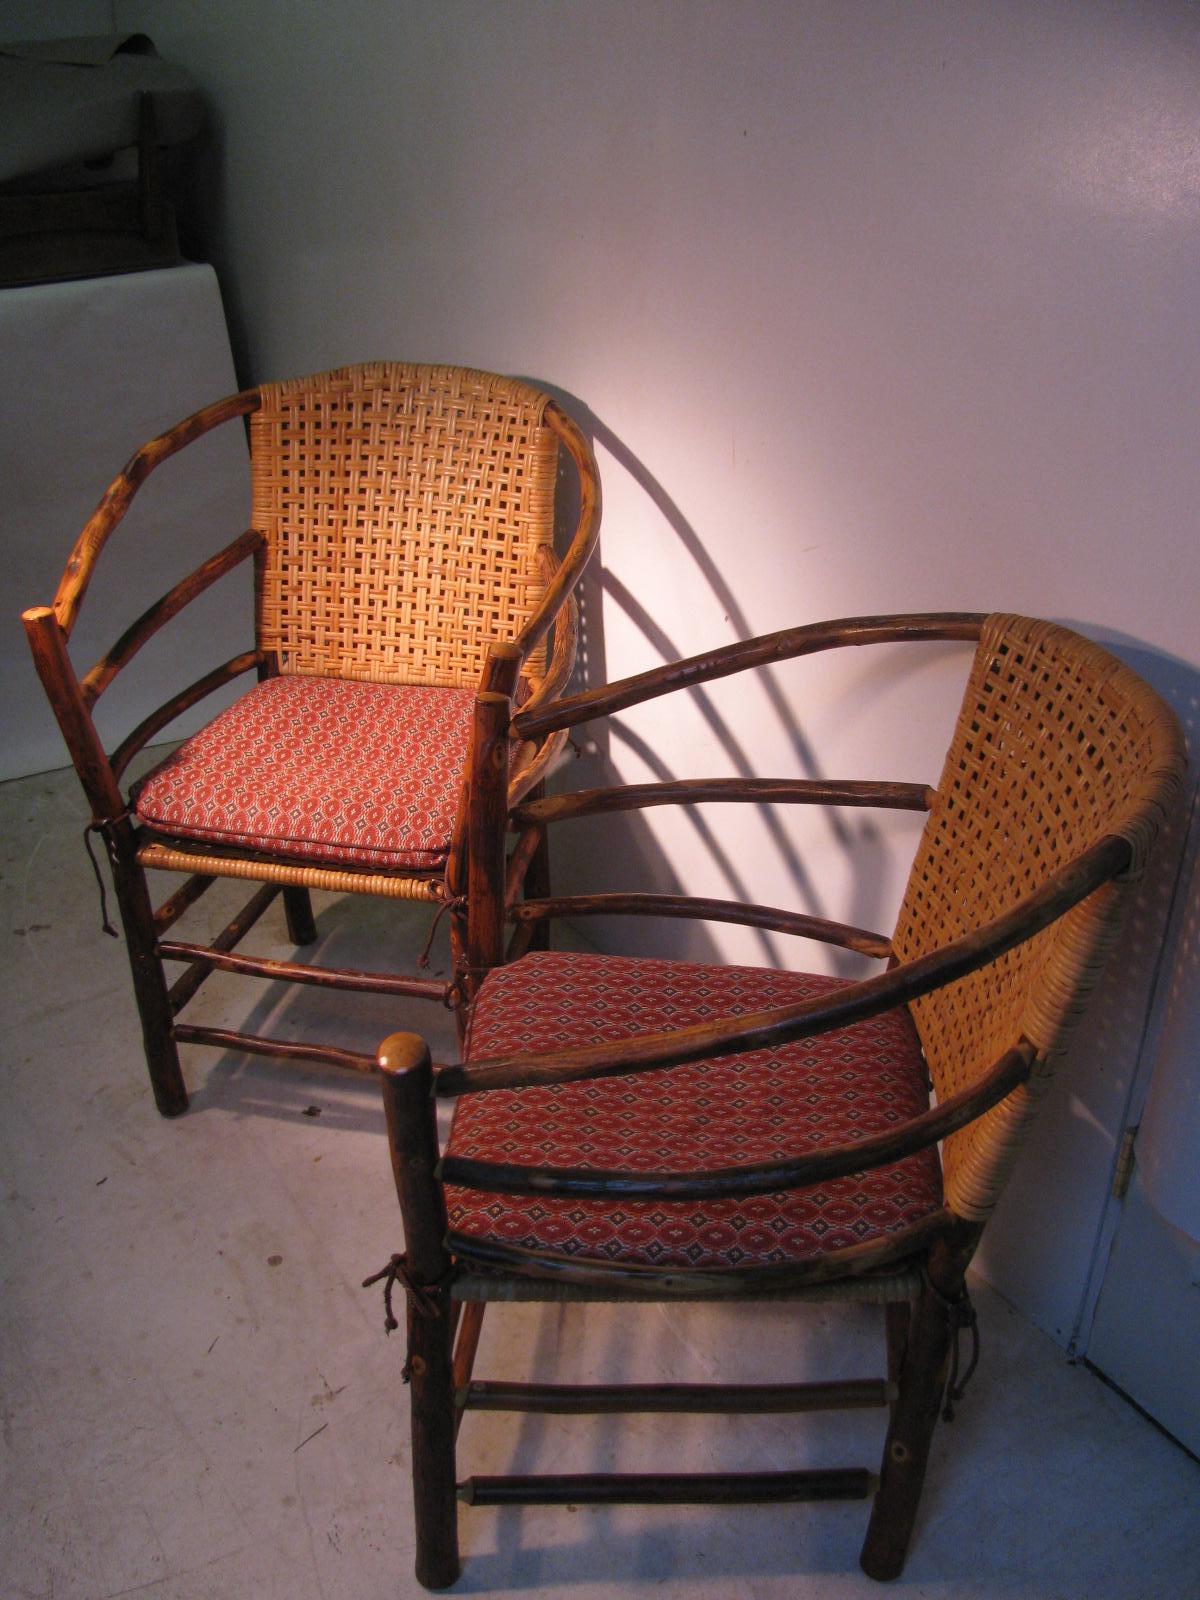 reed chairs